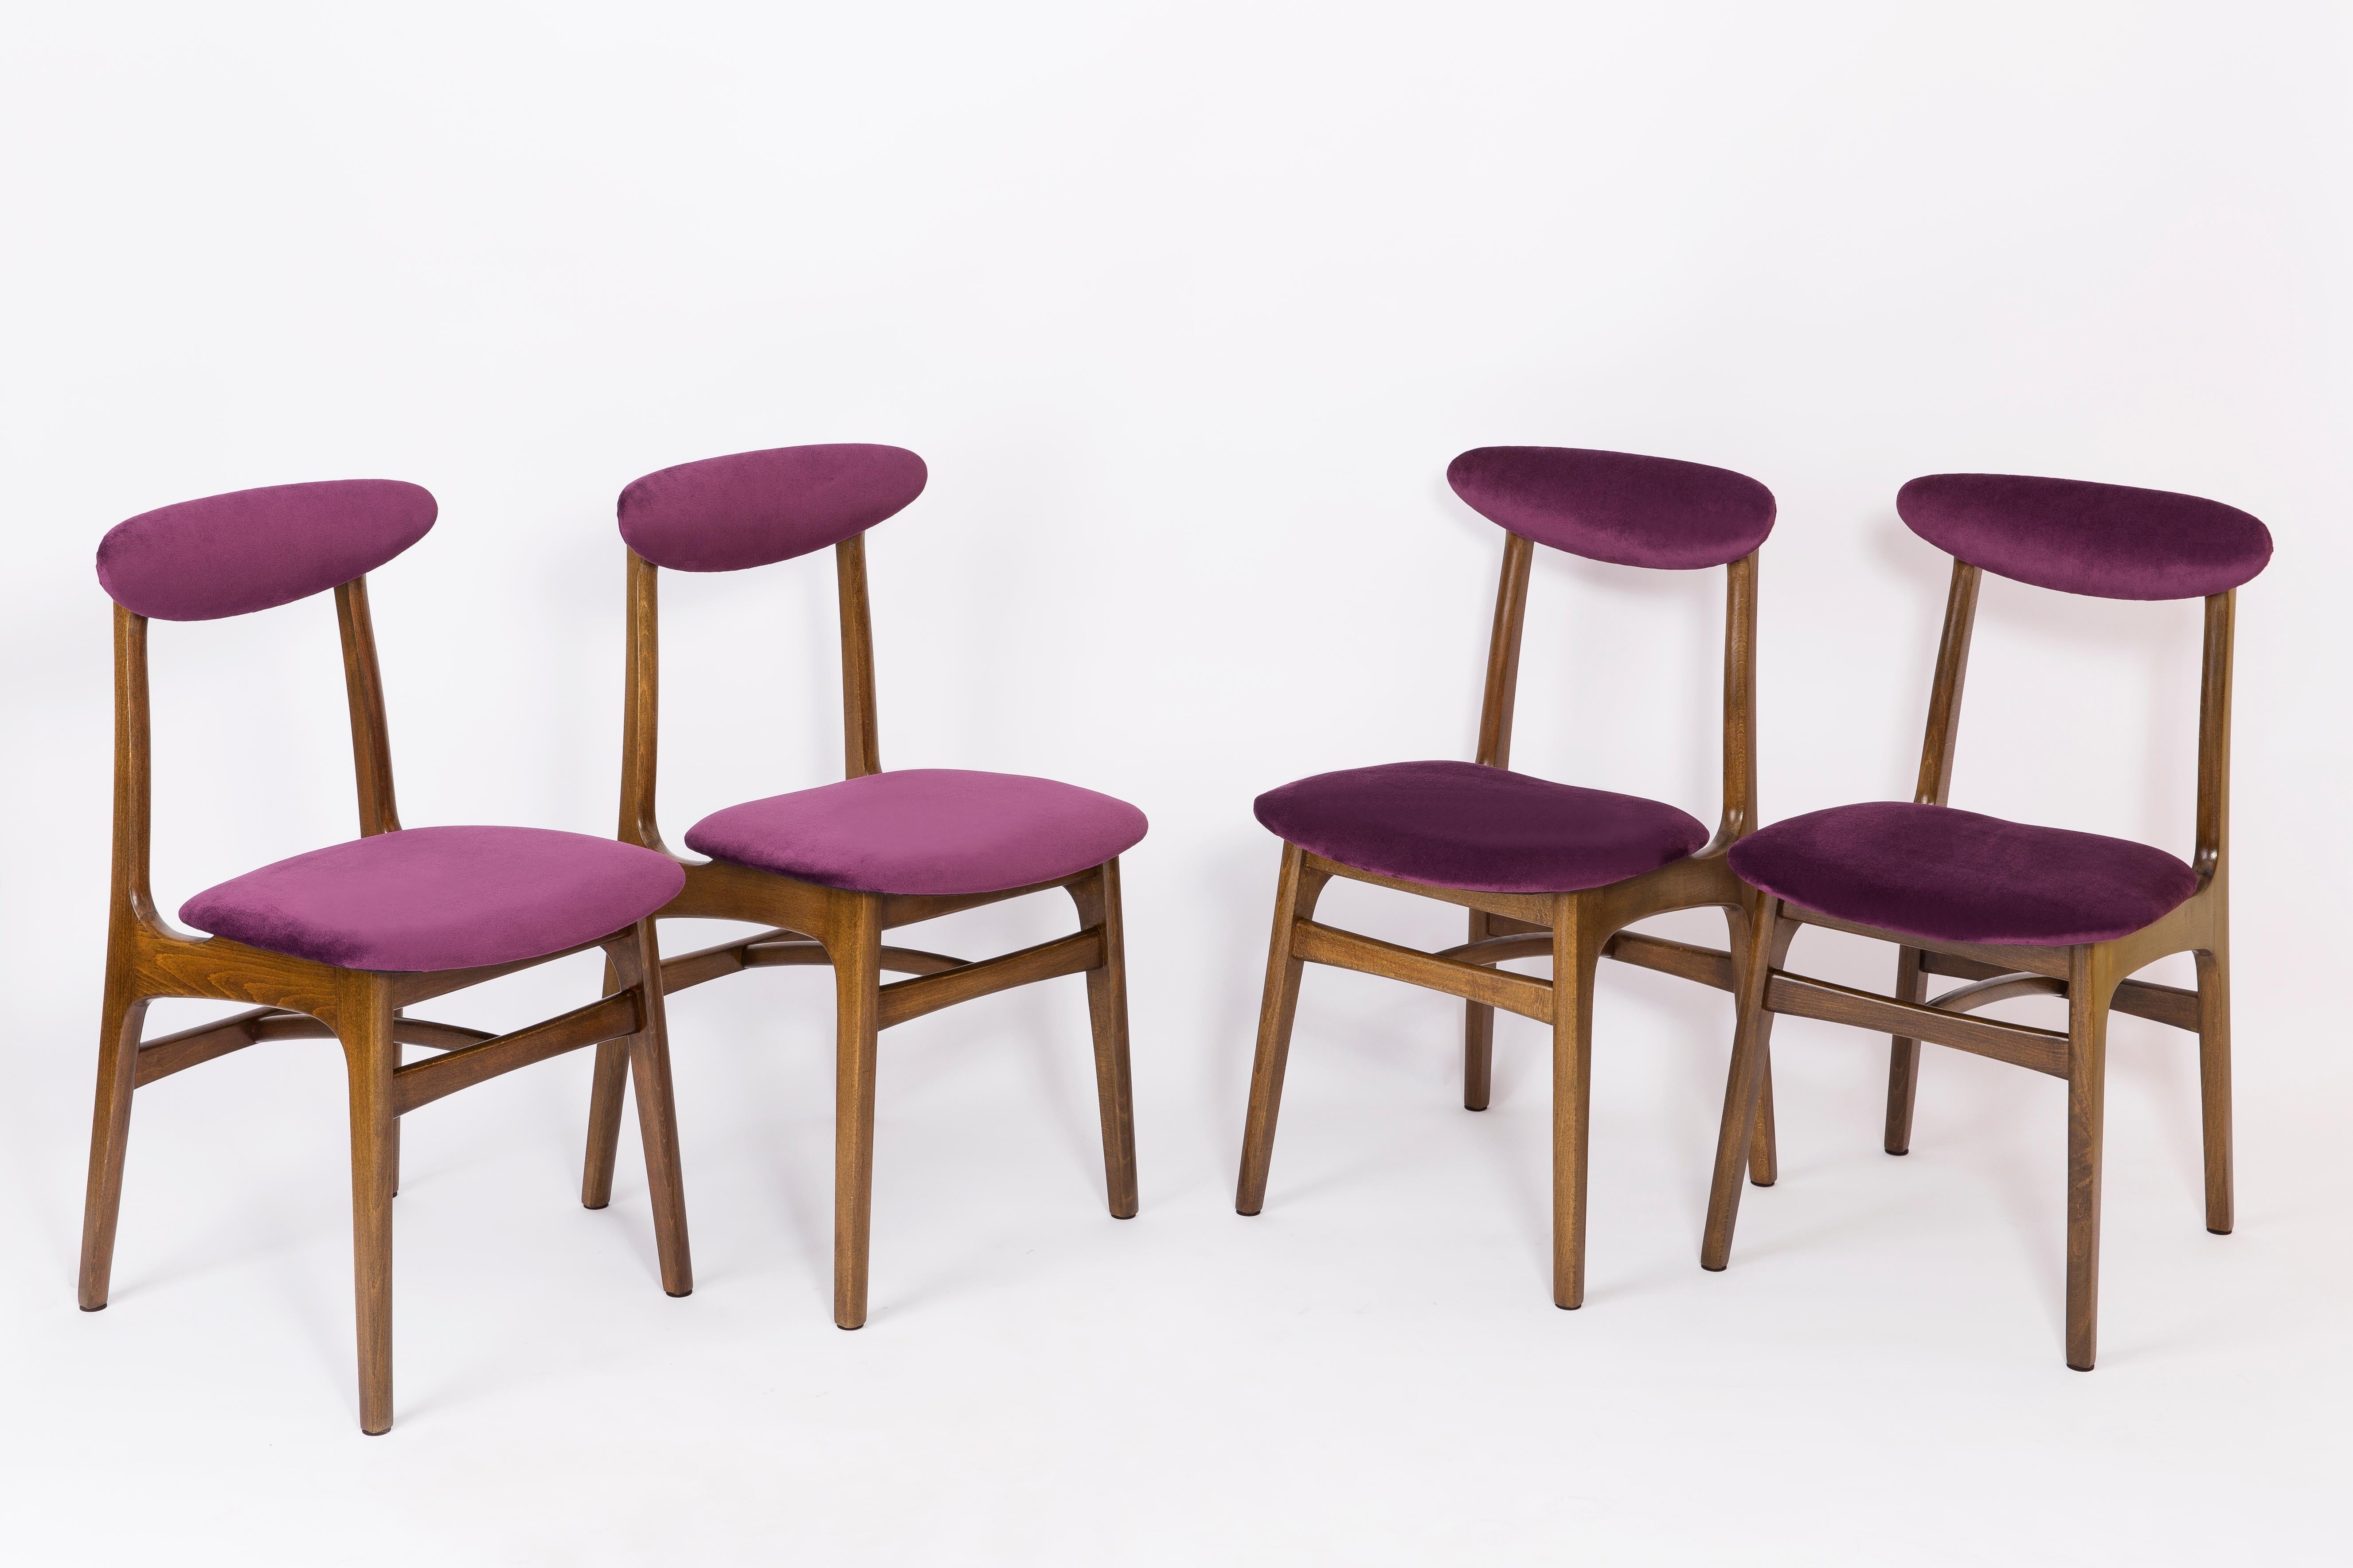 Chairs designed by prof. Rajmund Halas. They have been made of beechwood. They have undergone a complete upholstery renovation, the woodwork has been refreshed. Seats and backs were dressed in a plum (color 969), durable and pleasant to the touch